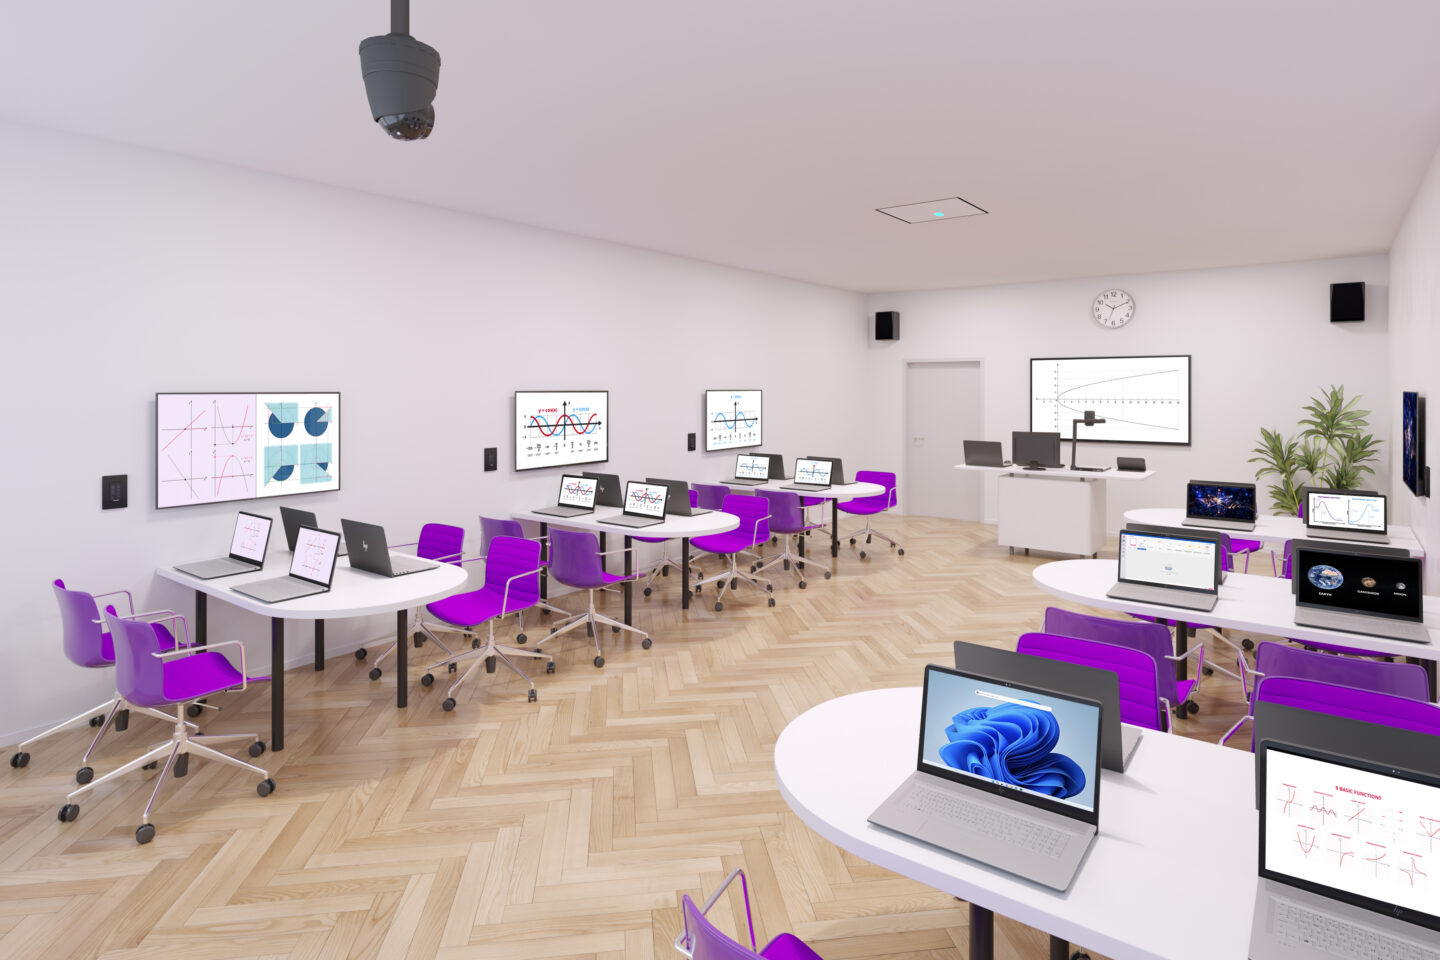 An active classroom, fully equipped with Kramer's solutions and collaboration devices